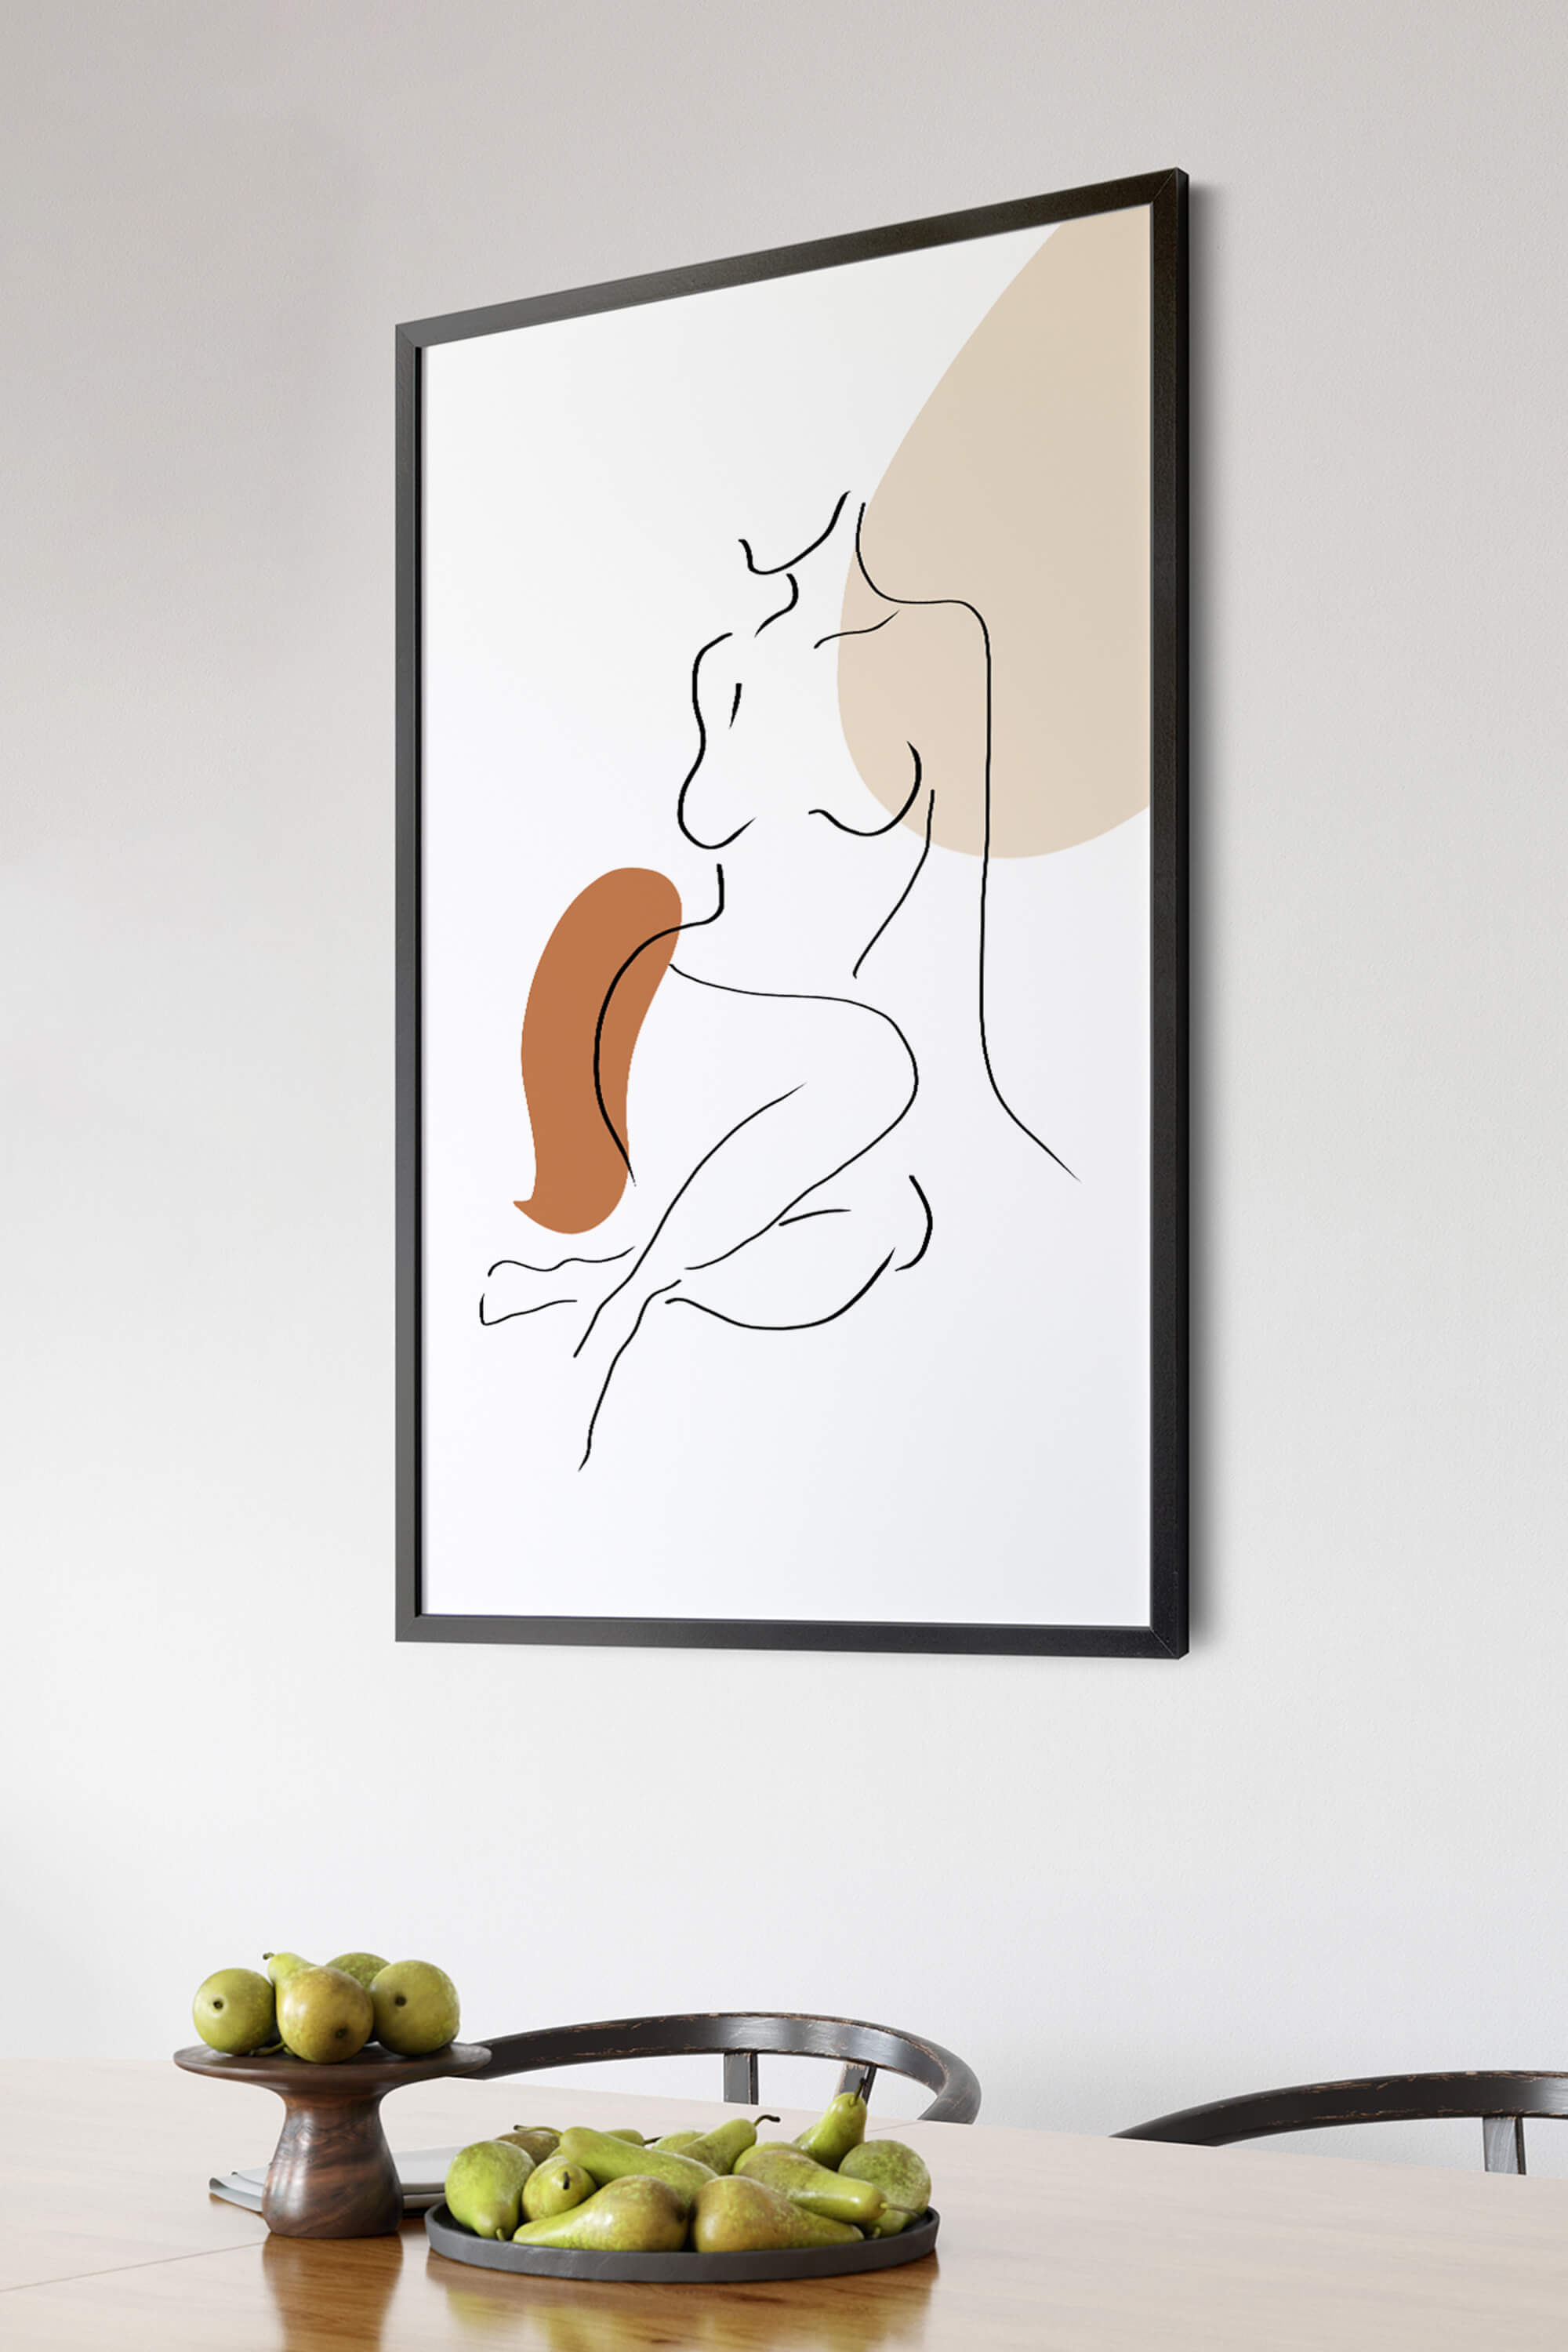 Elegant outline of a woman's form in line art, a serene and classy bedroom wall print.